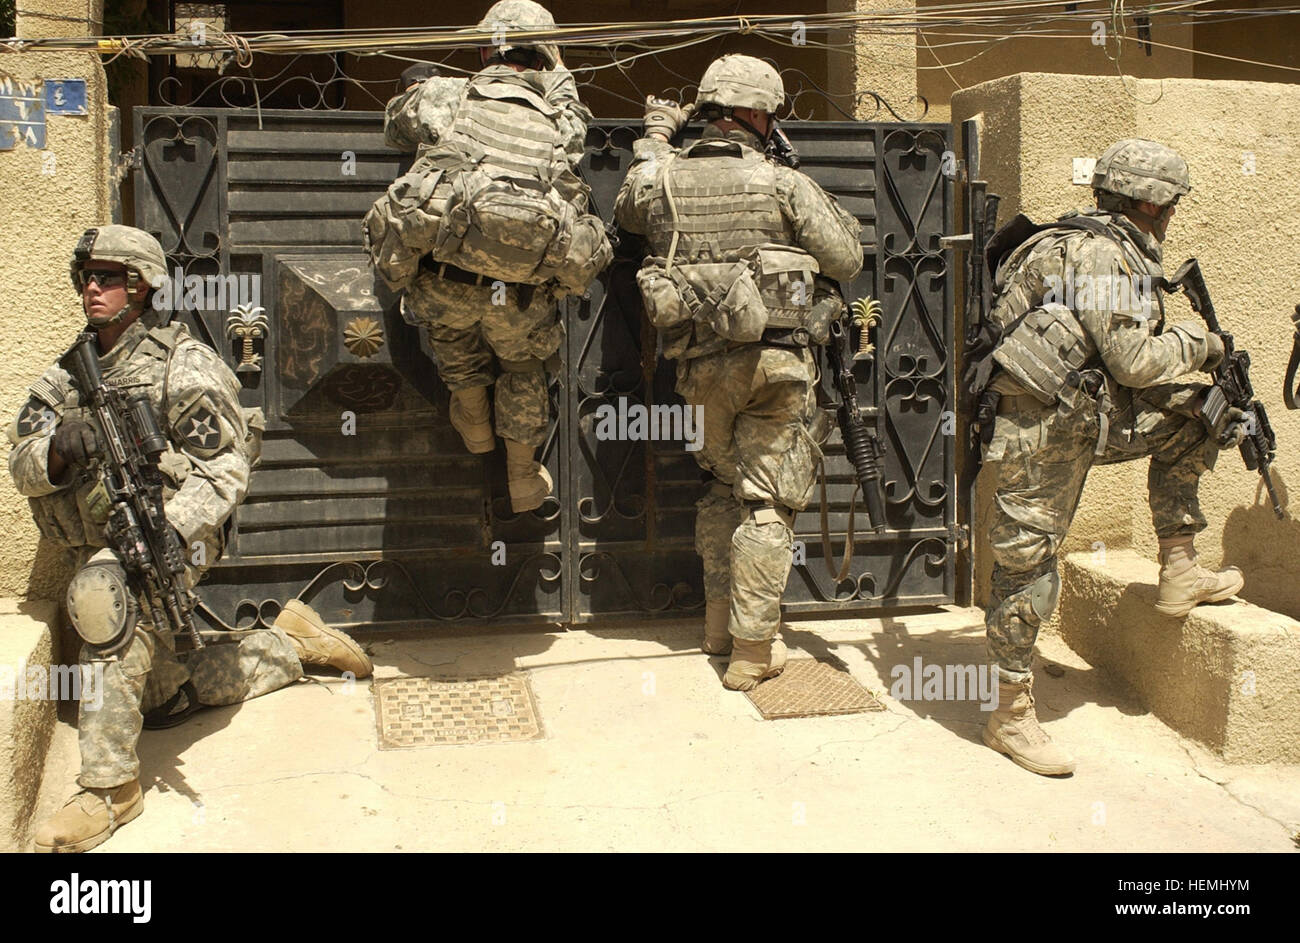 Soldiers from Company B, 1st Battalion, 23rd Infantry Regiment, 3rd Stryker Brigade Combat Team, 2nd Infantry Division attempt to breach a gate in order to enter and search a house during a combined cordon and search with the Iraqi National Police in the Rashid district of Baghdad on May 6. Operation Arrowhead Strike 10 44265 Stock Photo